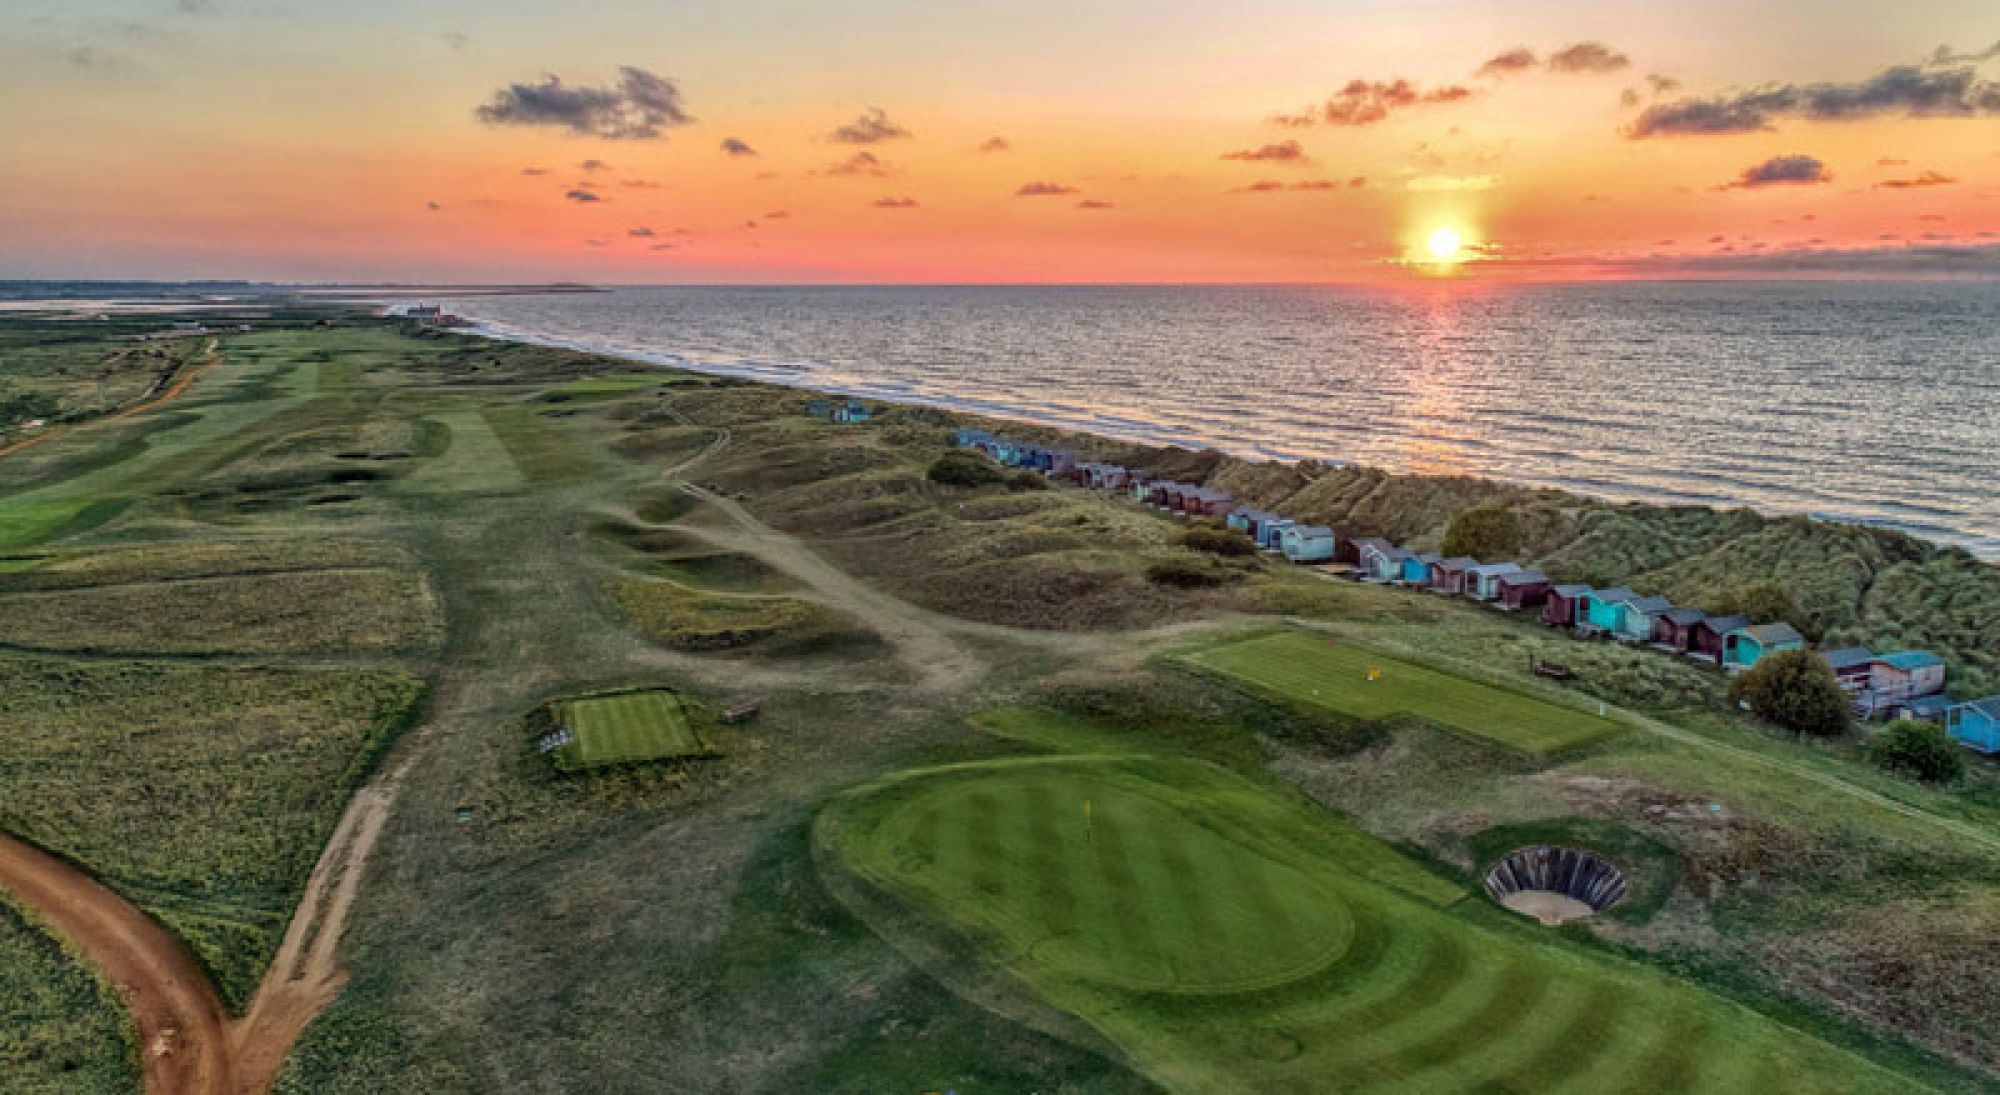 Royal West Norfolk Golf Club offers some of the most excellent golf course around Norfolk